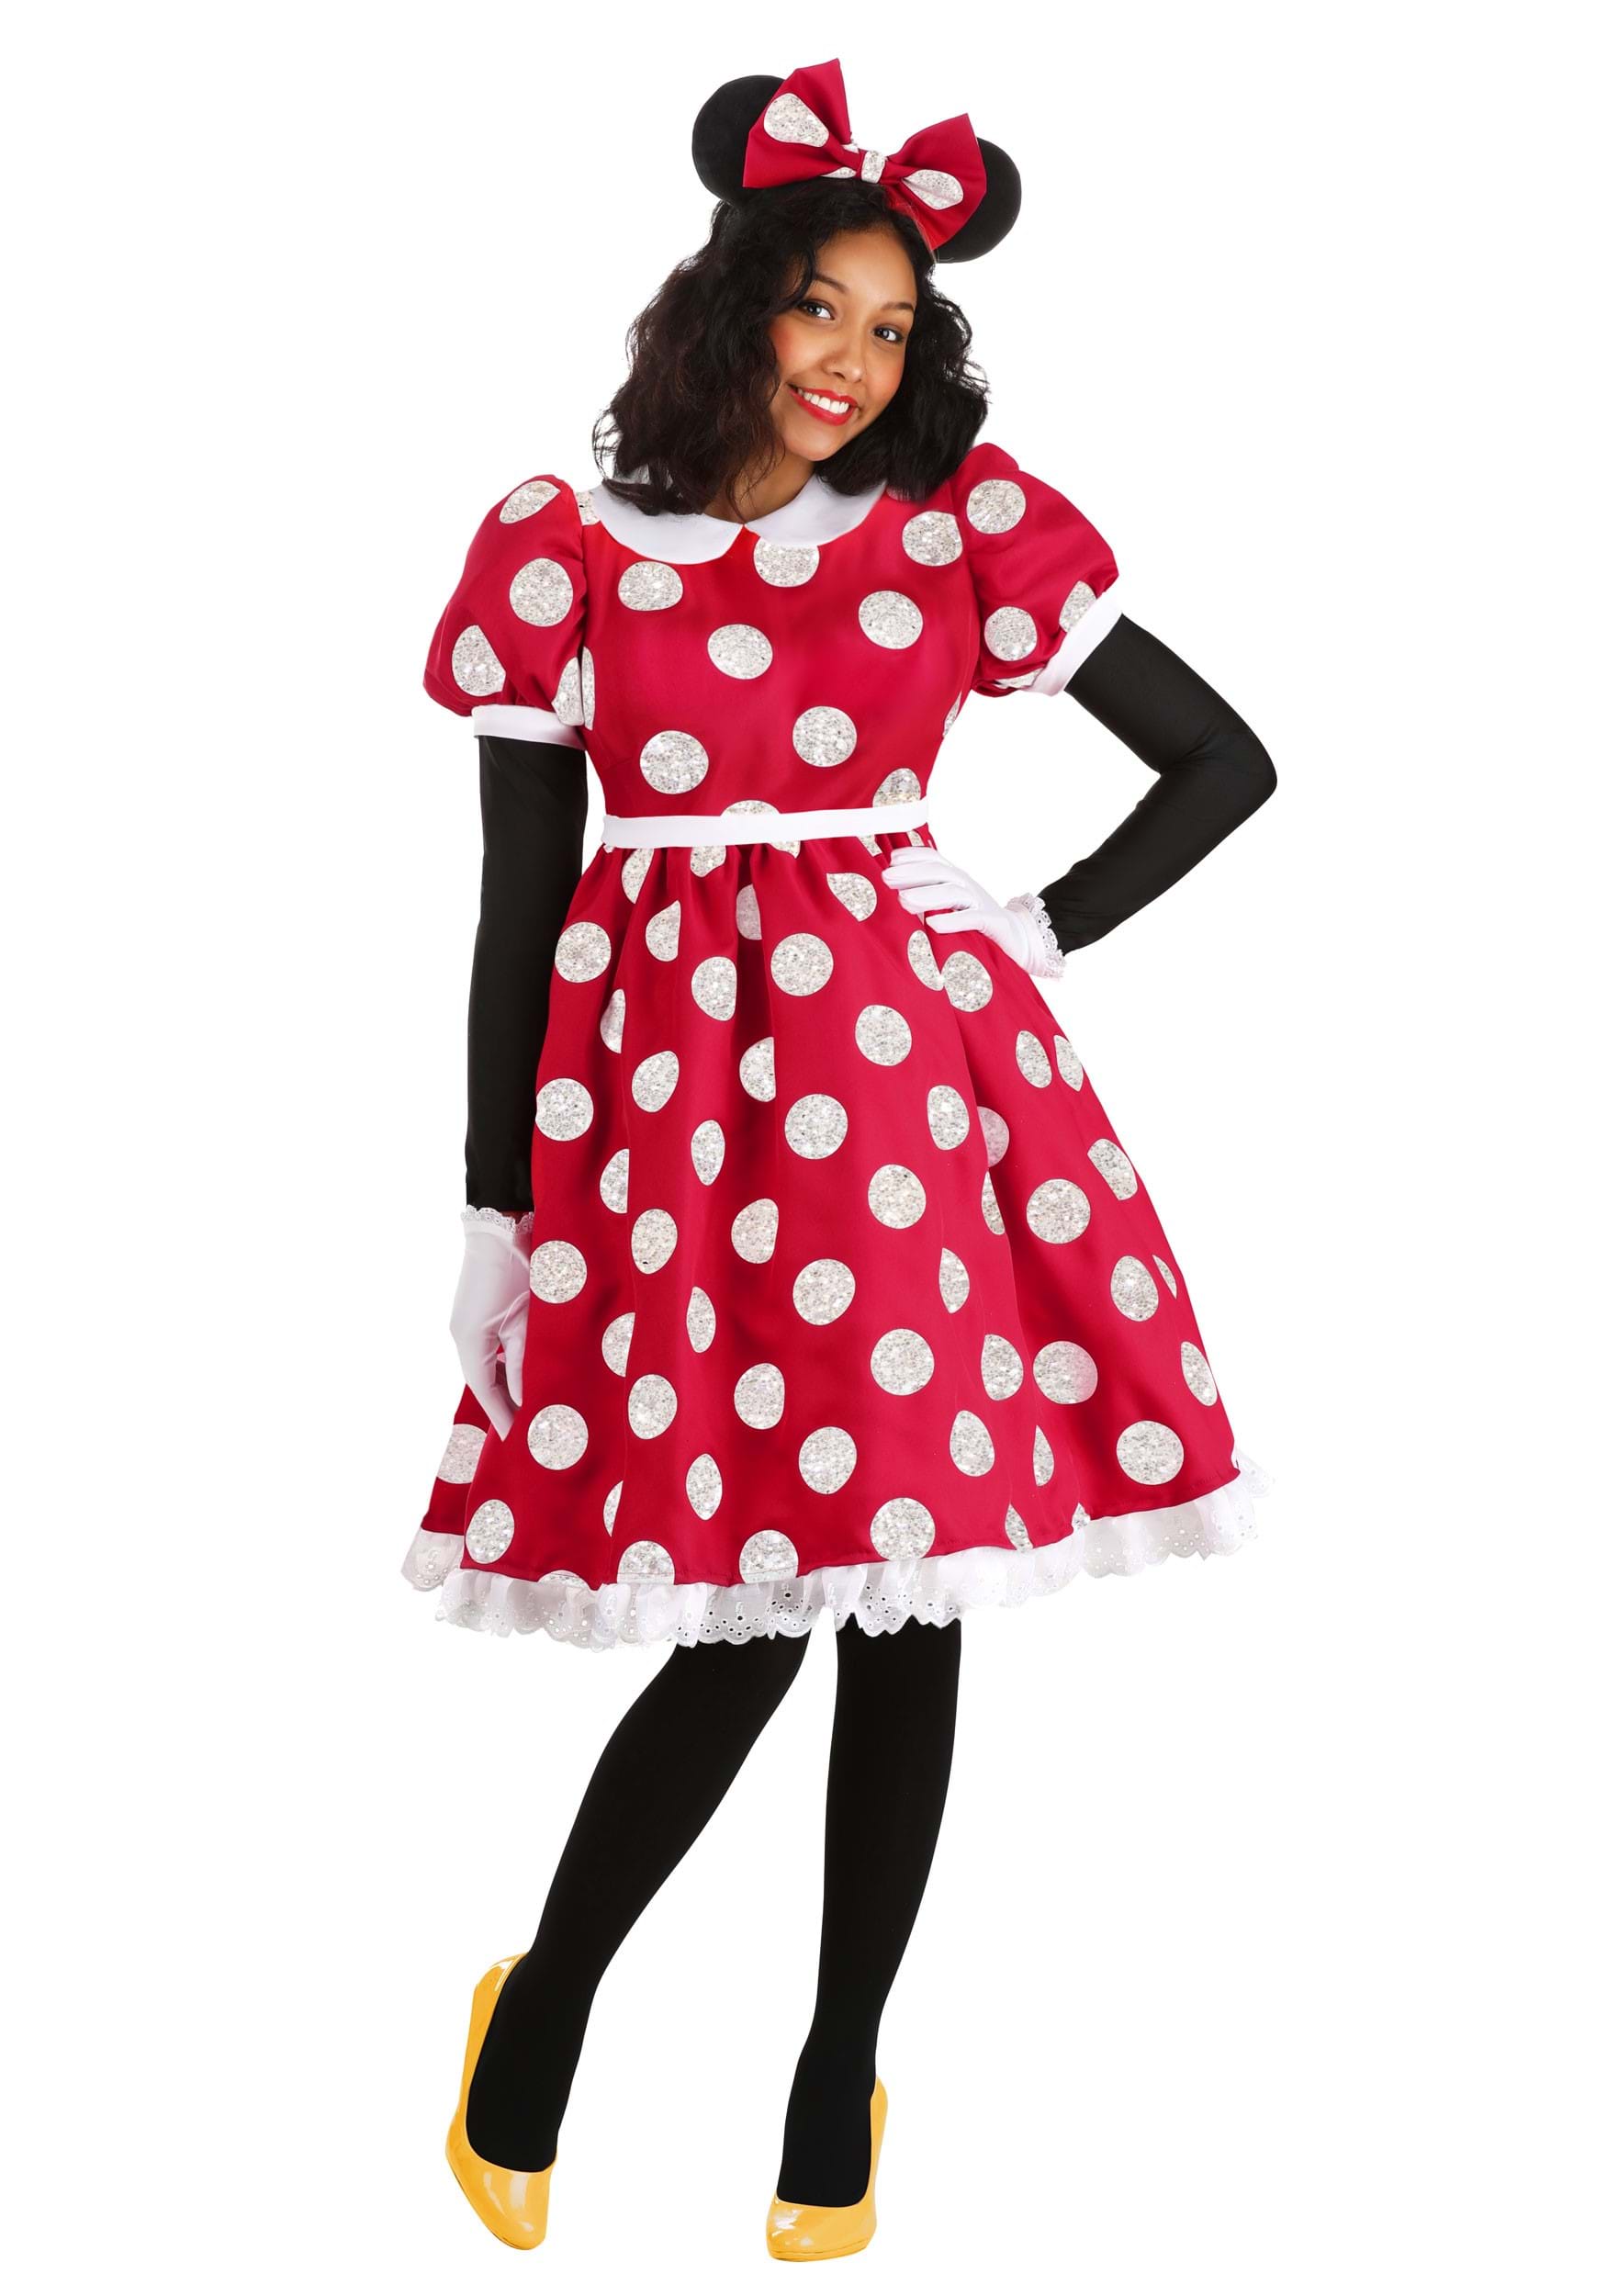 Photos - Fancy Dress Disney FUN Costumes  Deluxe Adult Minnie Mouse Costume Black/Red/Wh 